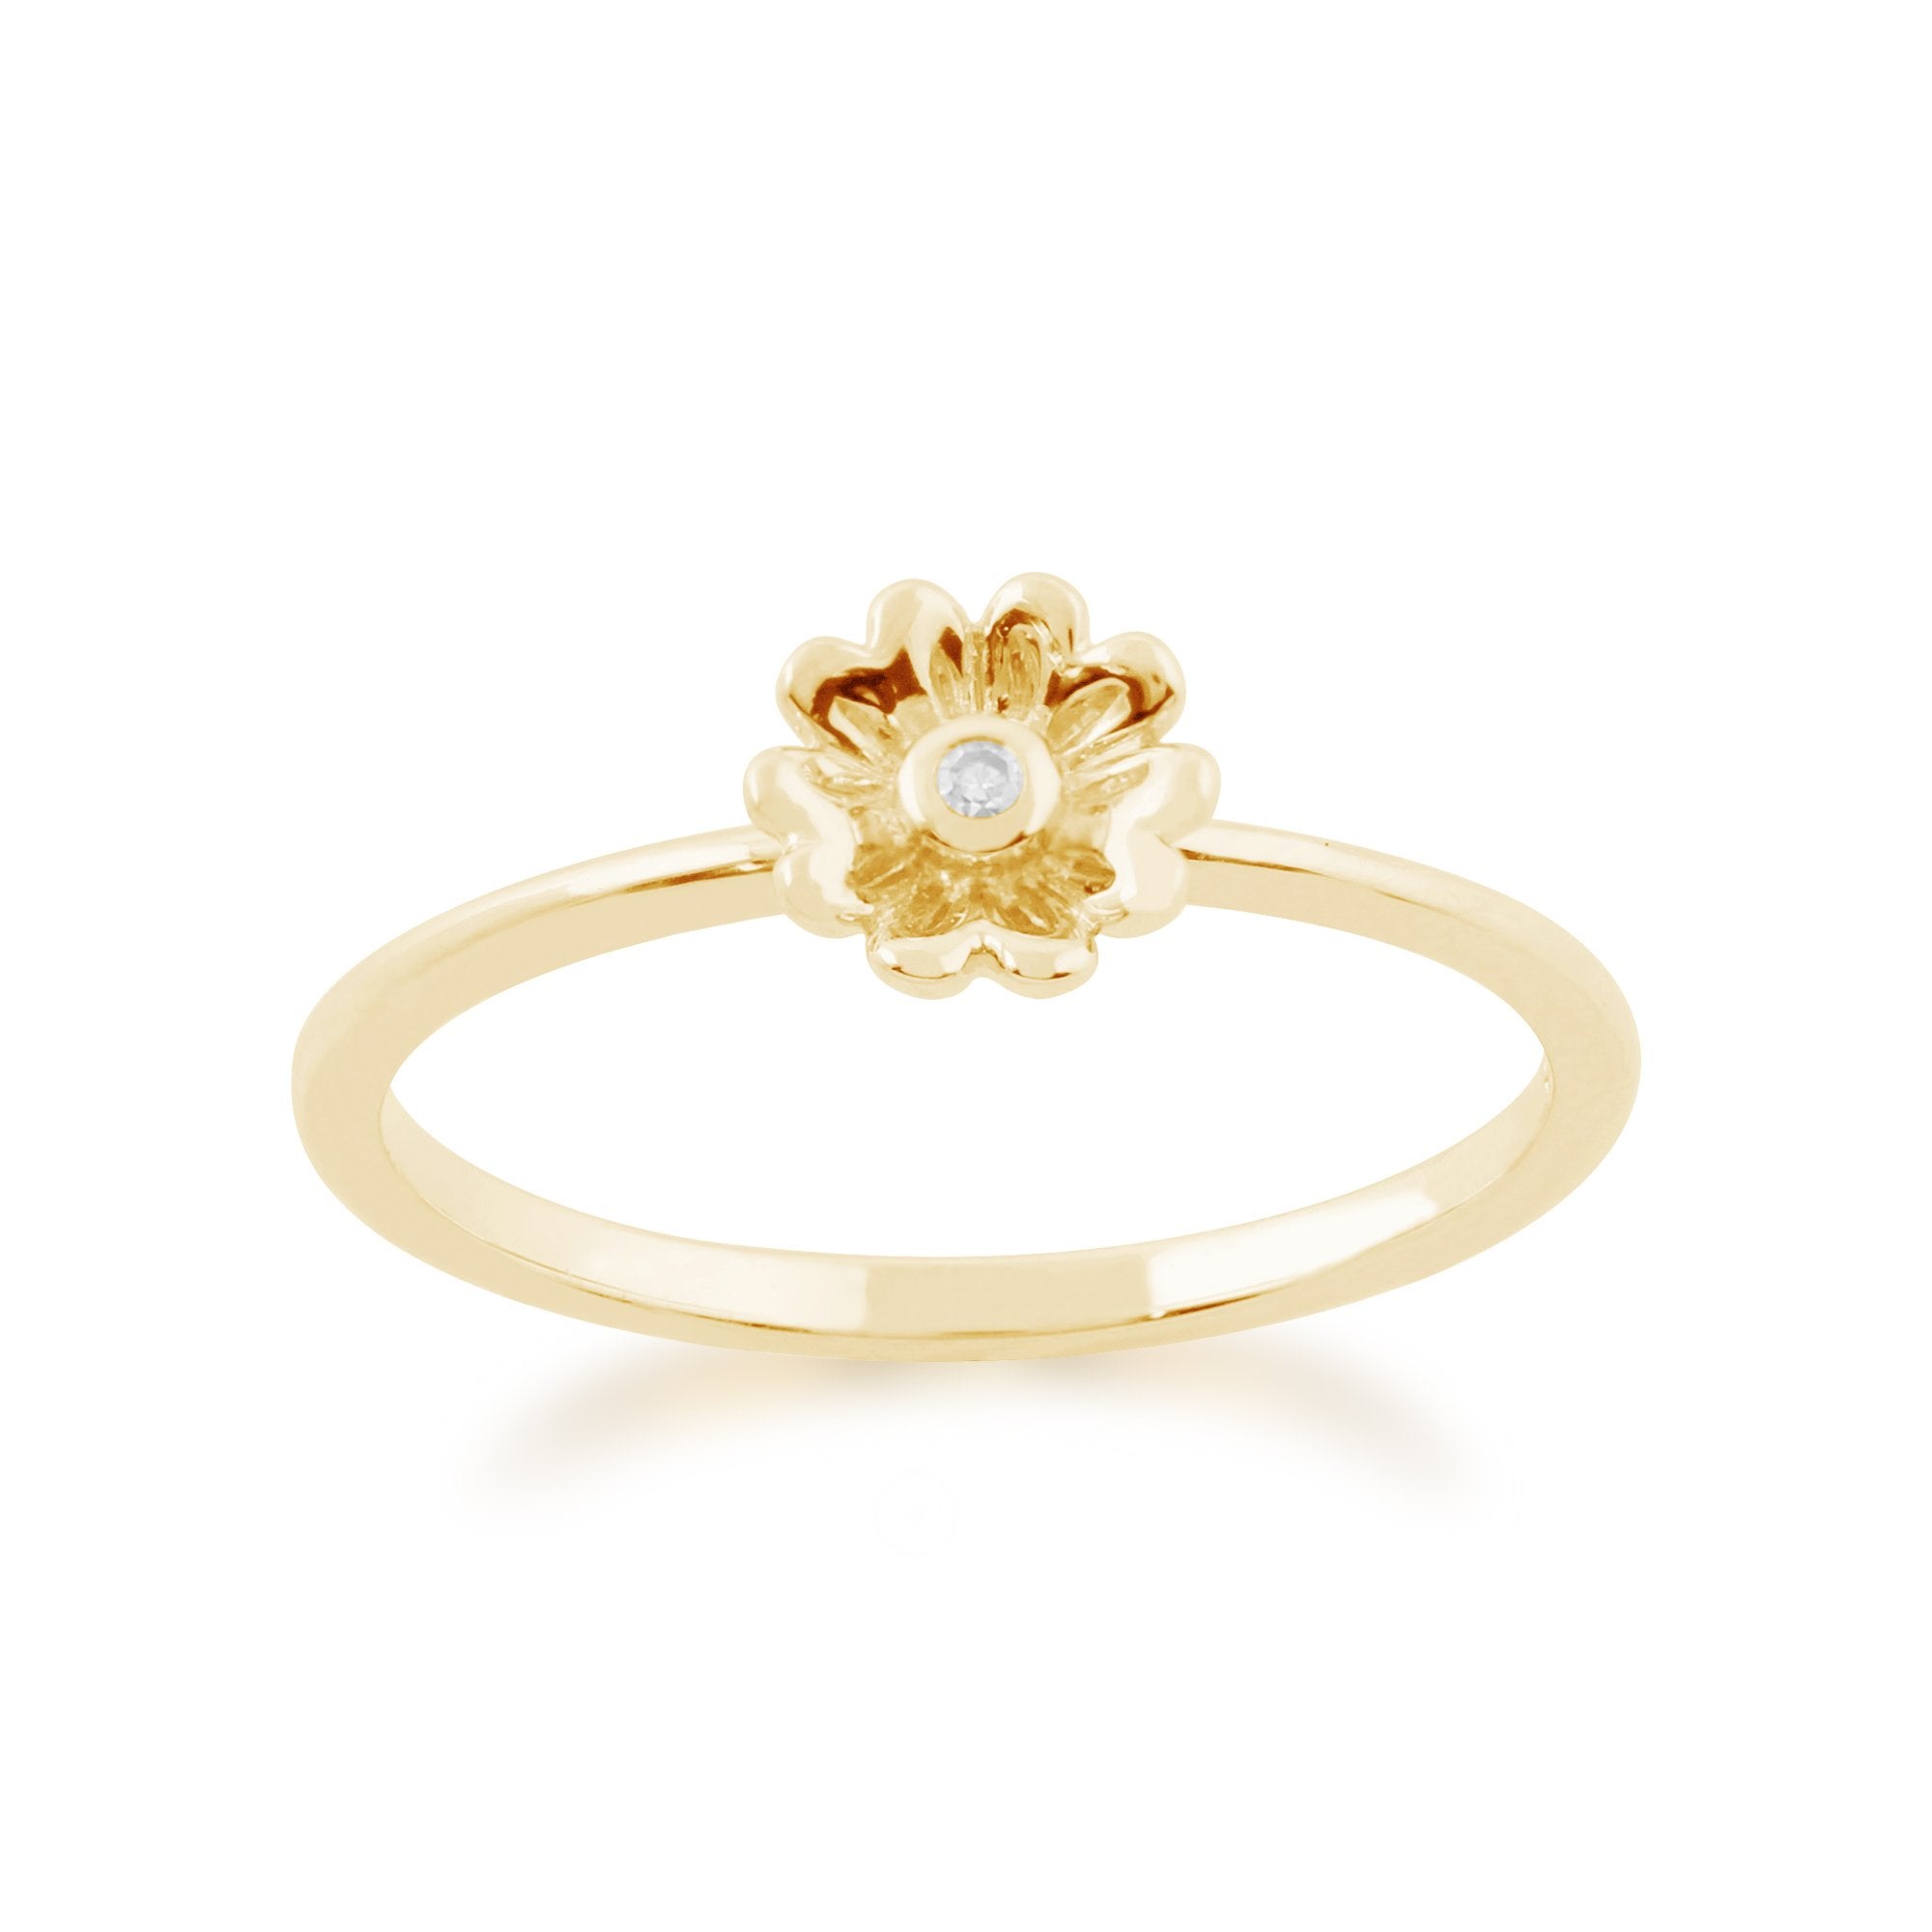 Gemondo 9ct Yellow Gold 0.01ct Diamond Stackable Floral Ring Image 1